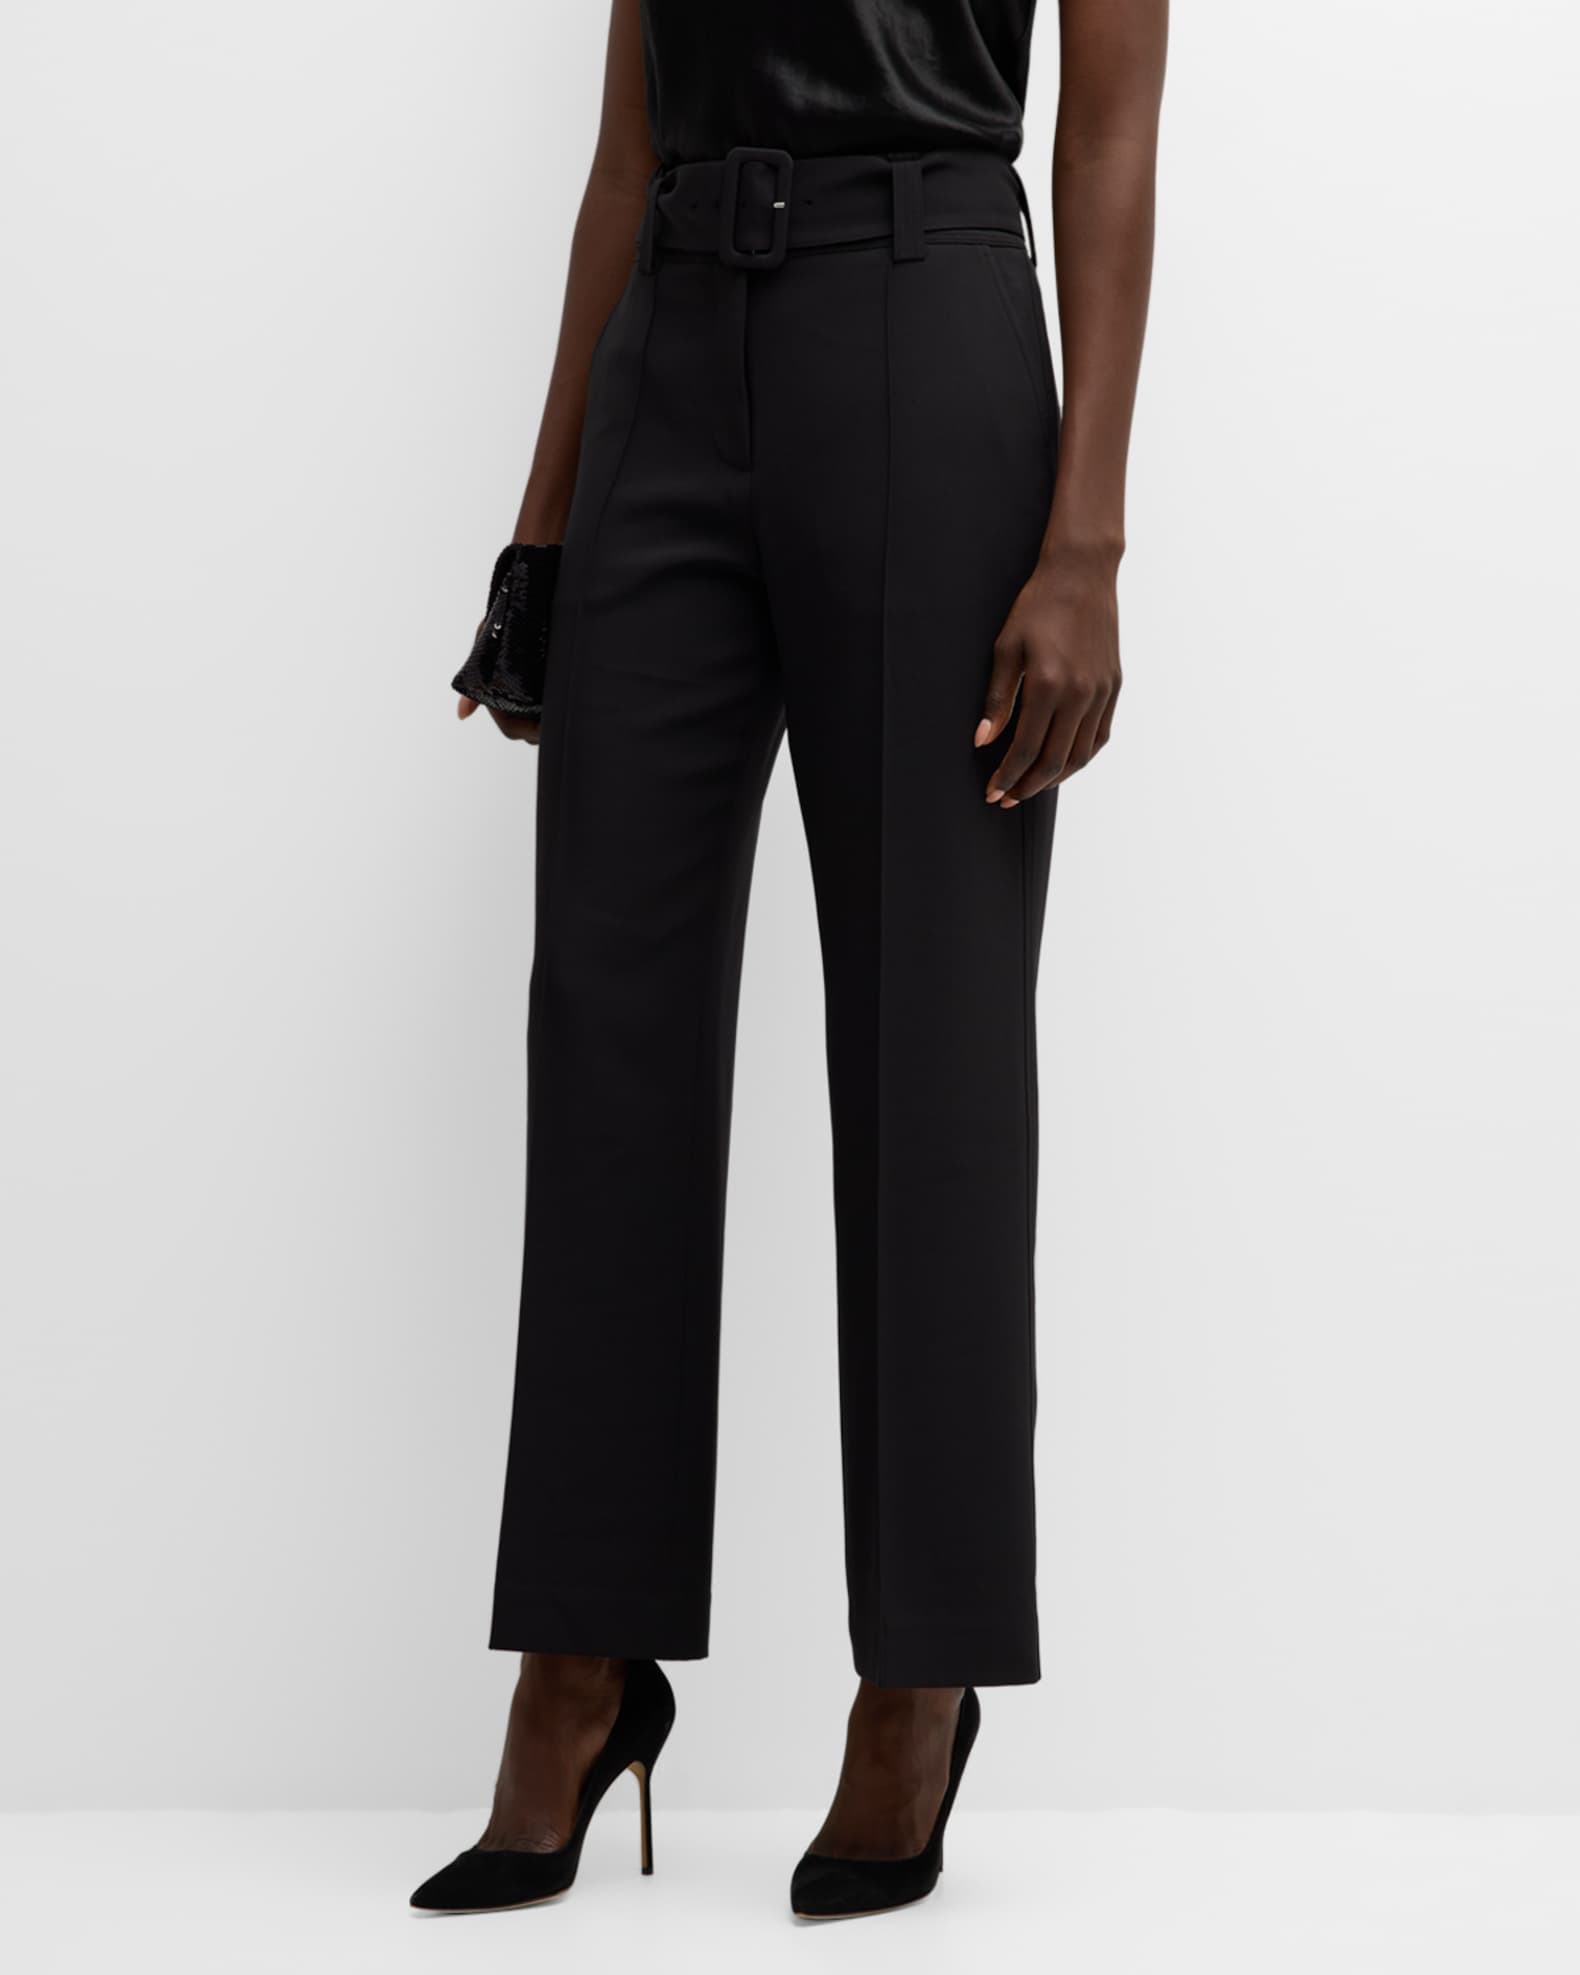 Elie Tahari The Baylor Belted High-Rise Straight-Leg Pants | Neiman Marcus